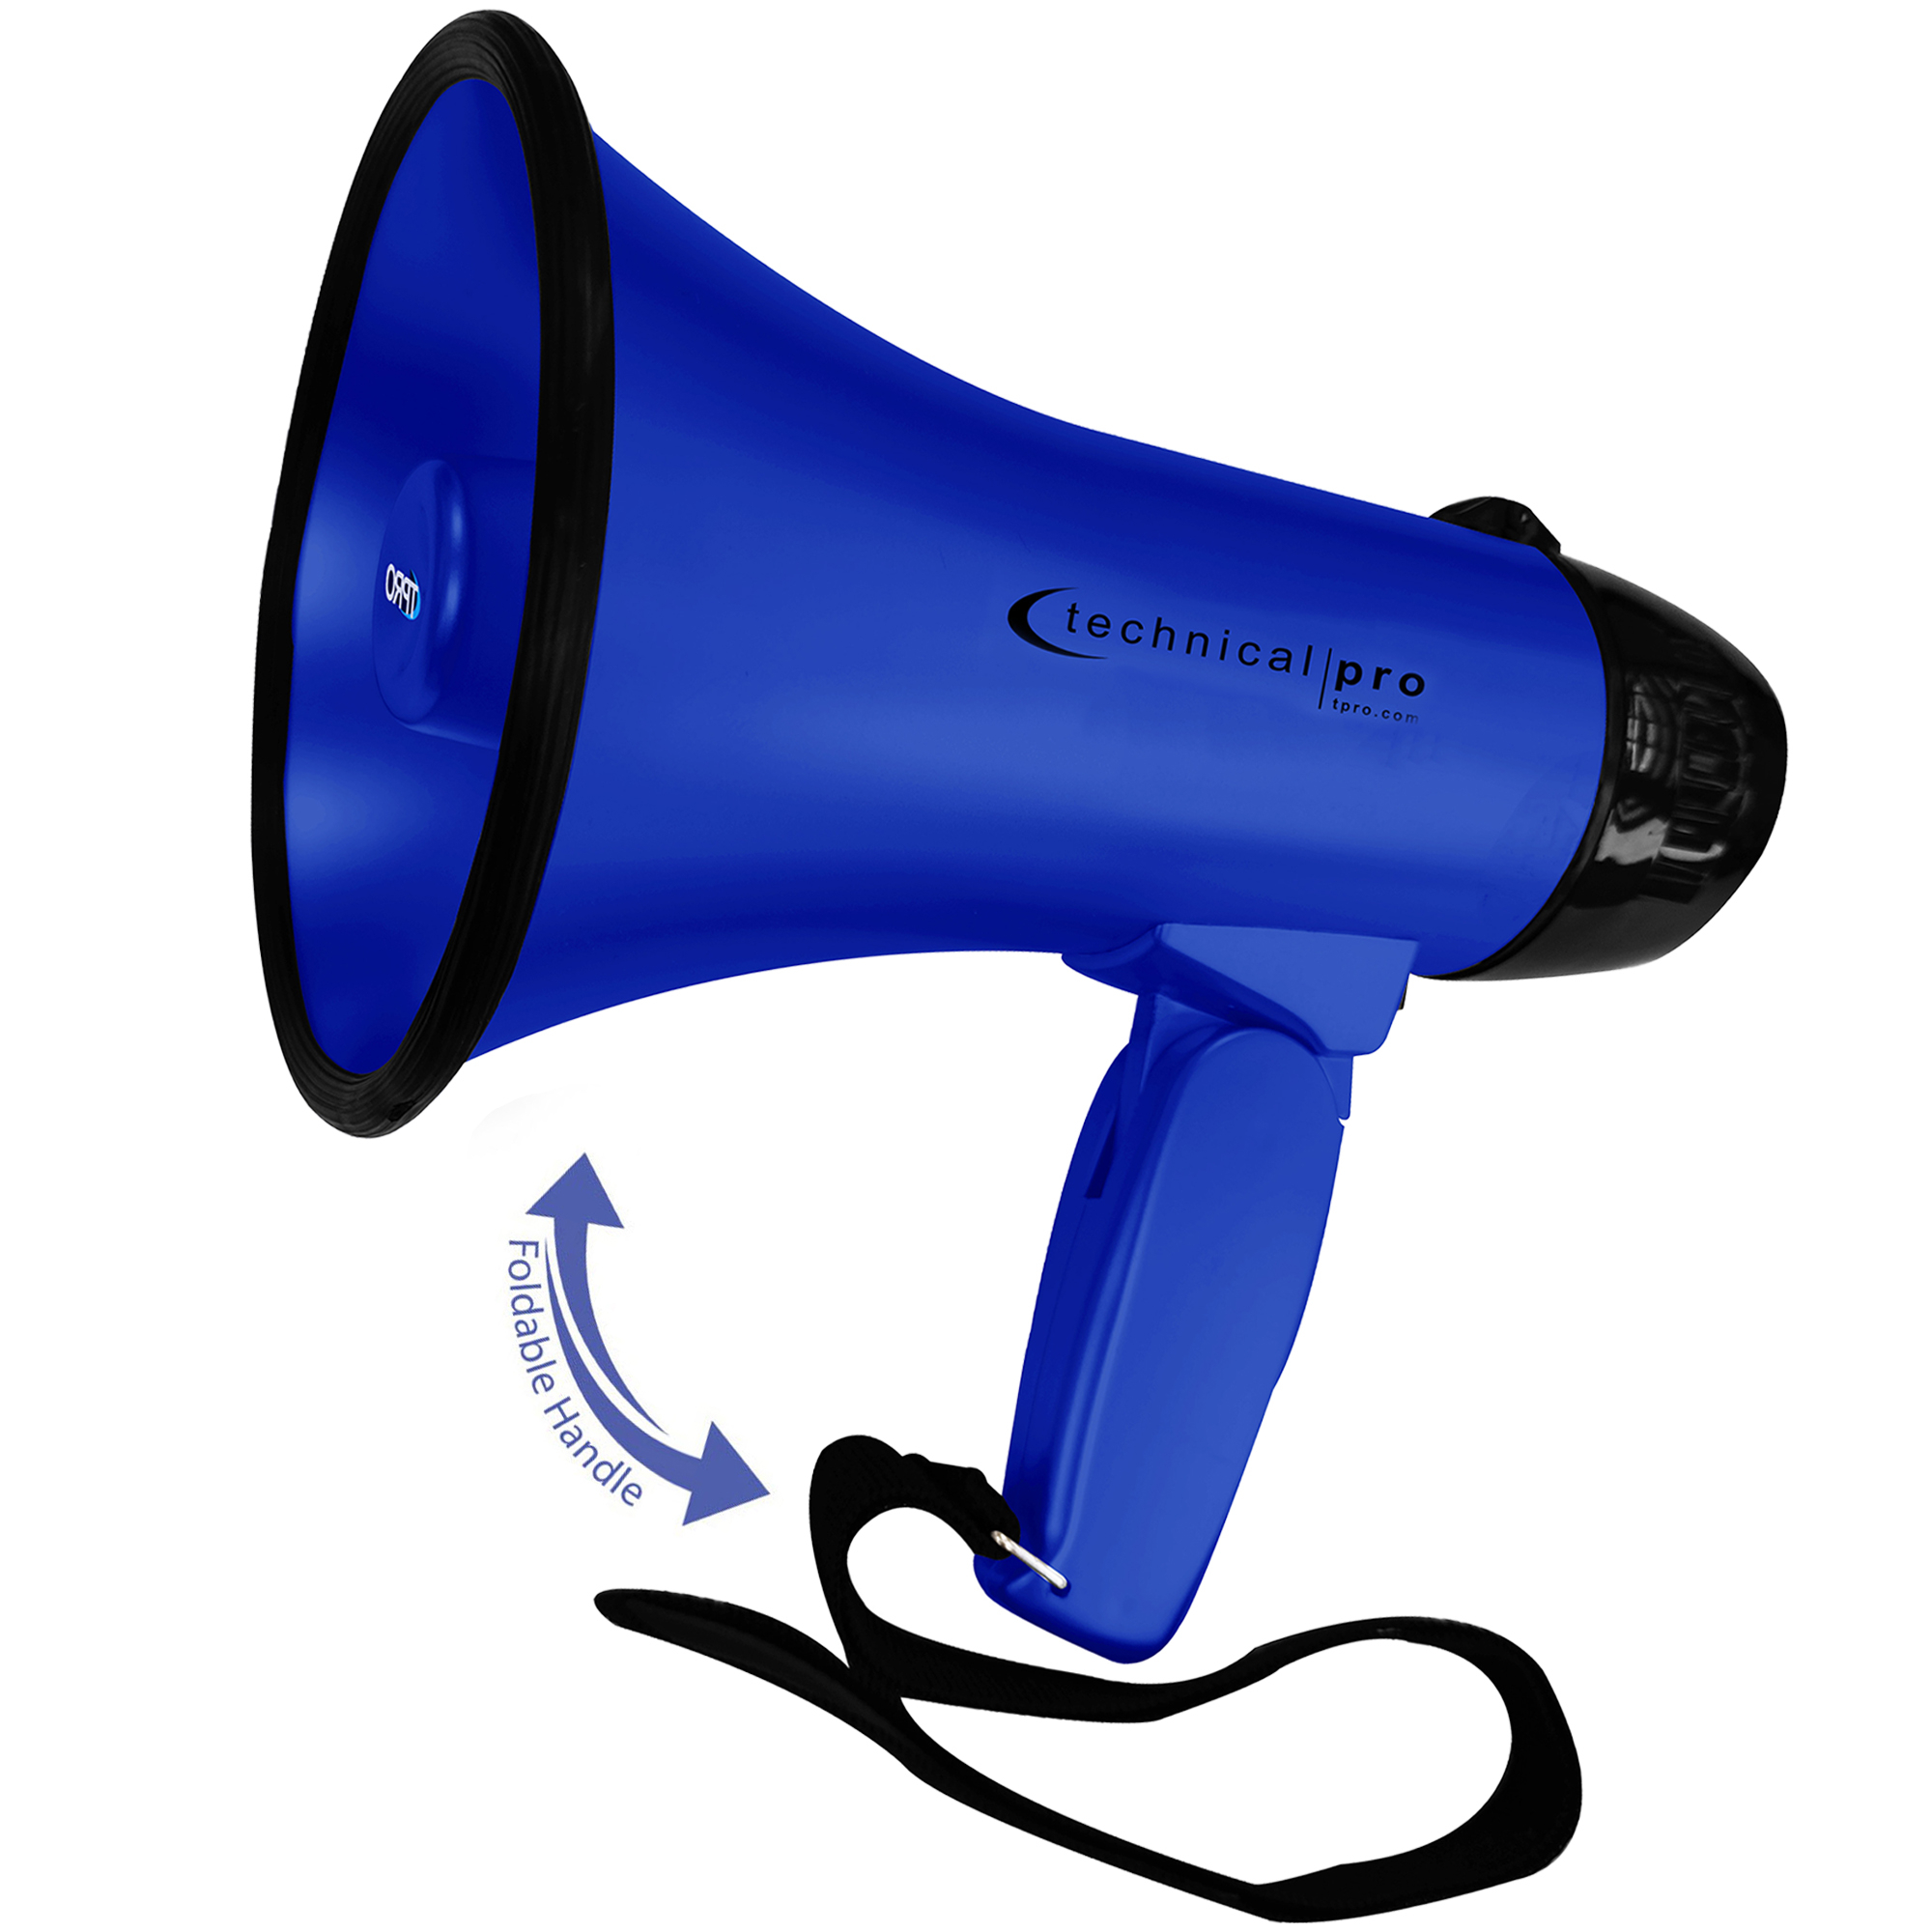 Technical Pro Lightweight Portable 20 Watts Blue And Black Megaphone Bullhorn 300M Range With Strap, Siren, And Volume Control